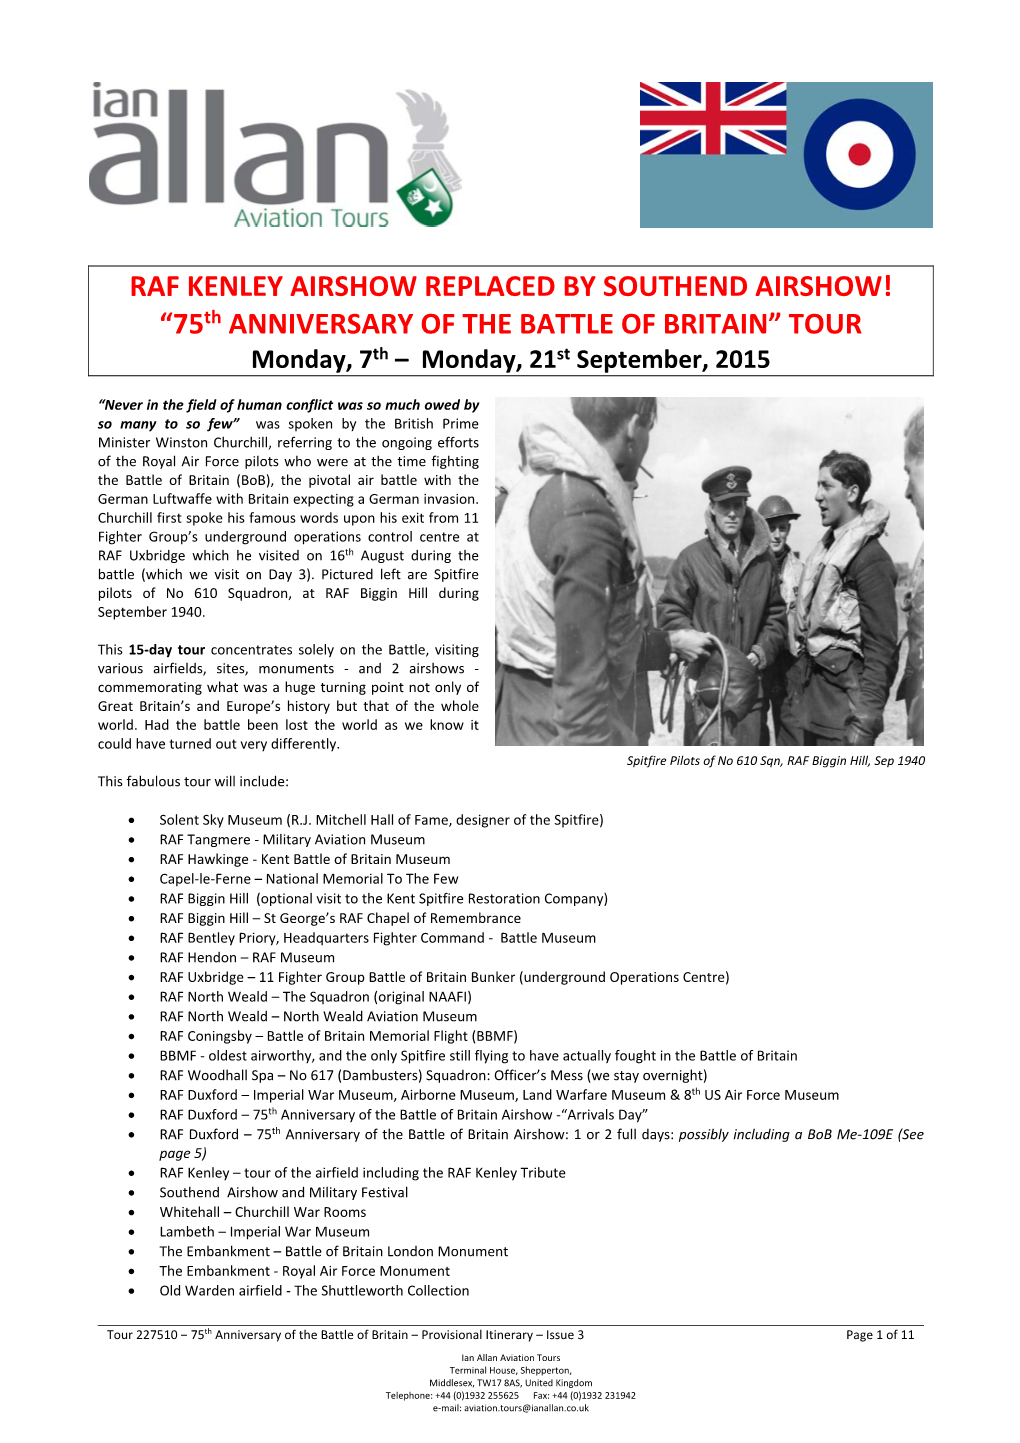 RAF KENLEY AIRSHOW REPLACED by SOUTHEND AIRSHOW! “75Th ANNIVERSARY of the BATTLE of BRITAIN” TOUR Monday, 7Th – Monday, 21St September, 2015